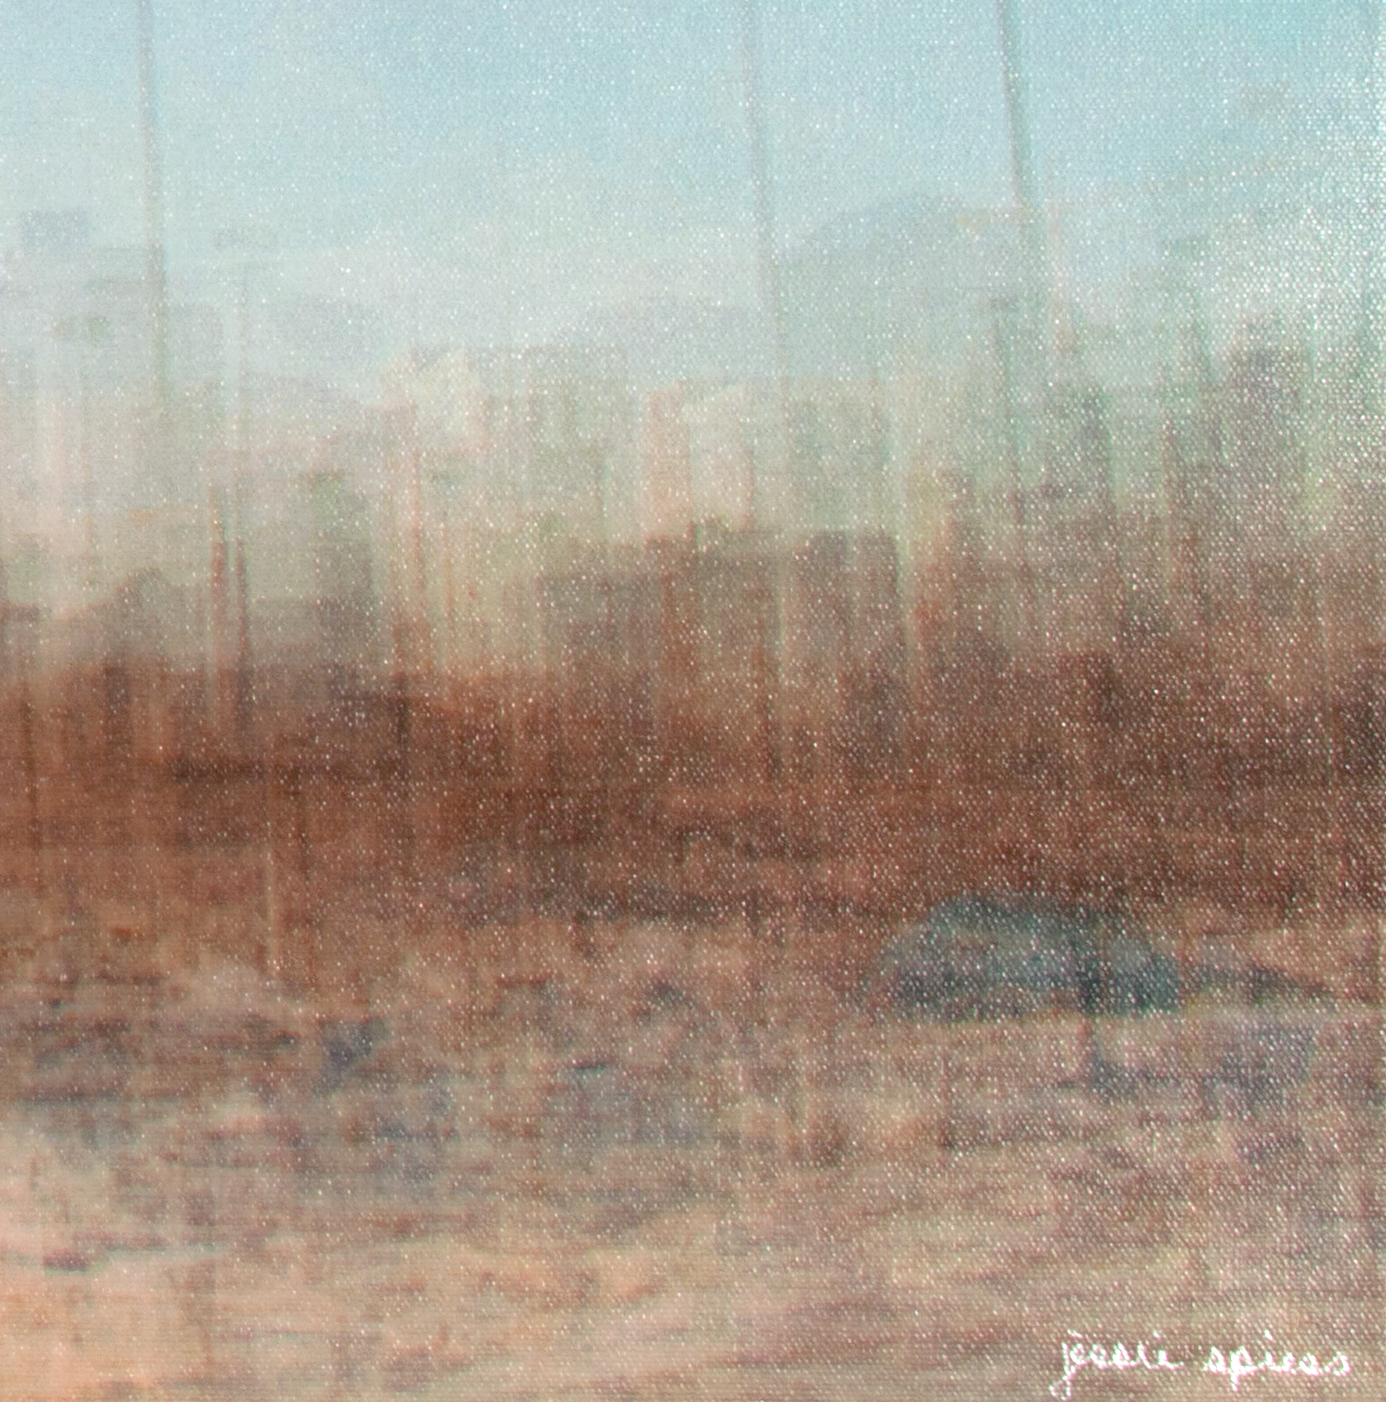 In this image, Jessie Spiess applies her signature multiple-exposure technique to the City of Milwaukee as seen from the Yacht Club on Lake Michigan. She often turns her camera to views of such iconic buildings and vistas, her technique emphasizing